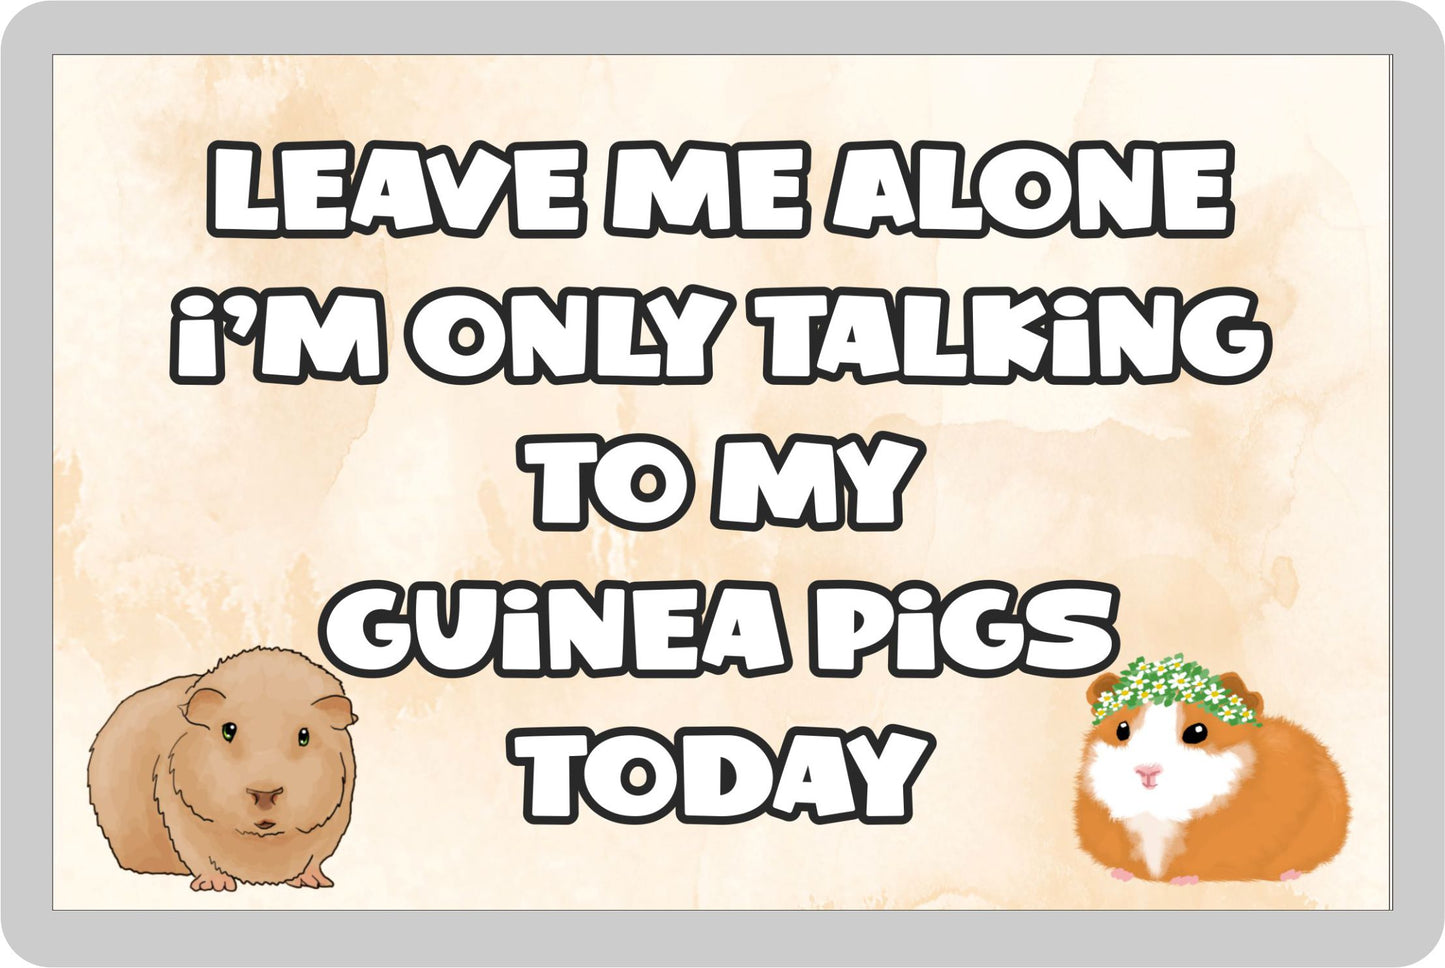 Guinea Pig Fridge Magnet Gift - Leave Me Alone I'm Only Talking To My * Today - Novelty Cute Bird Animal Present